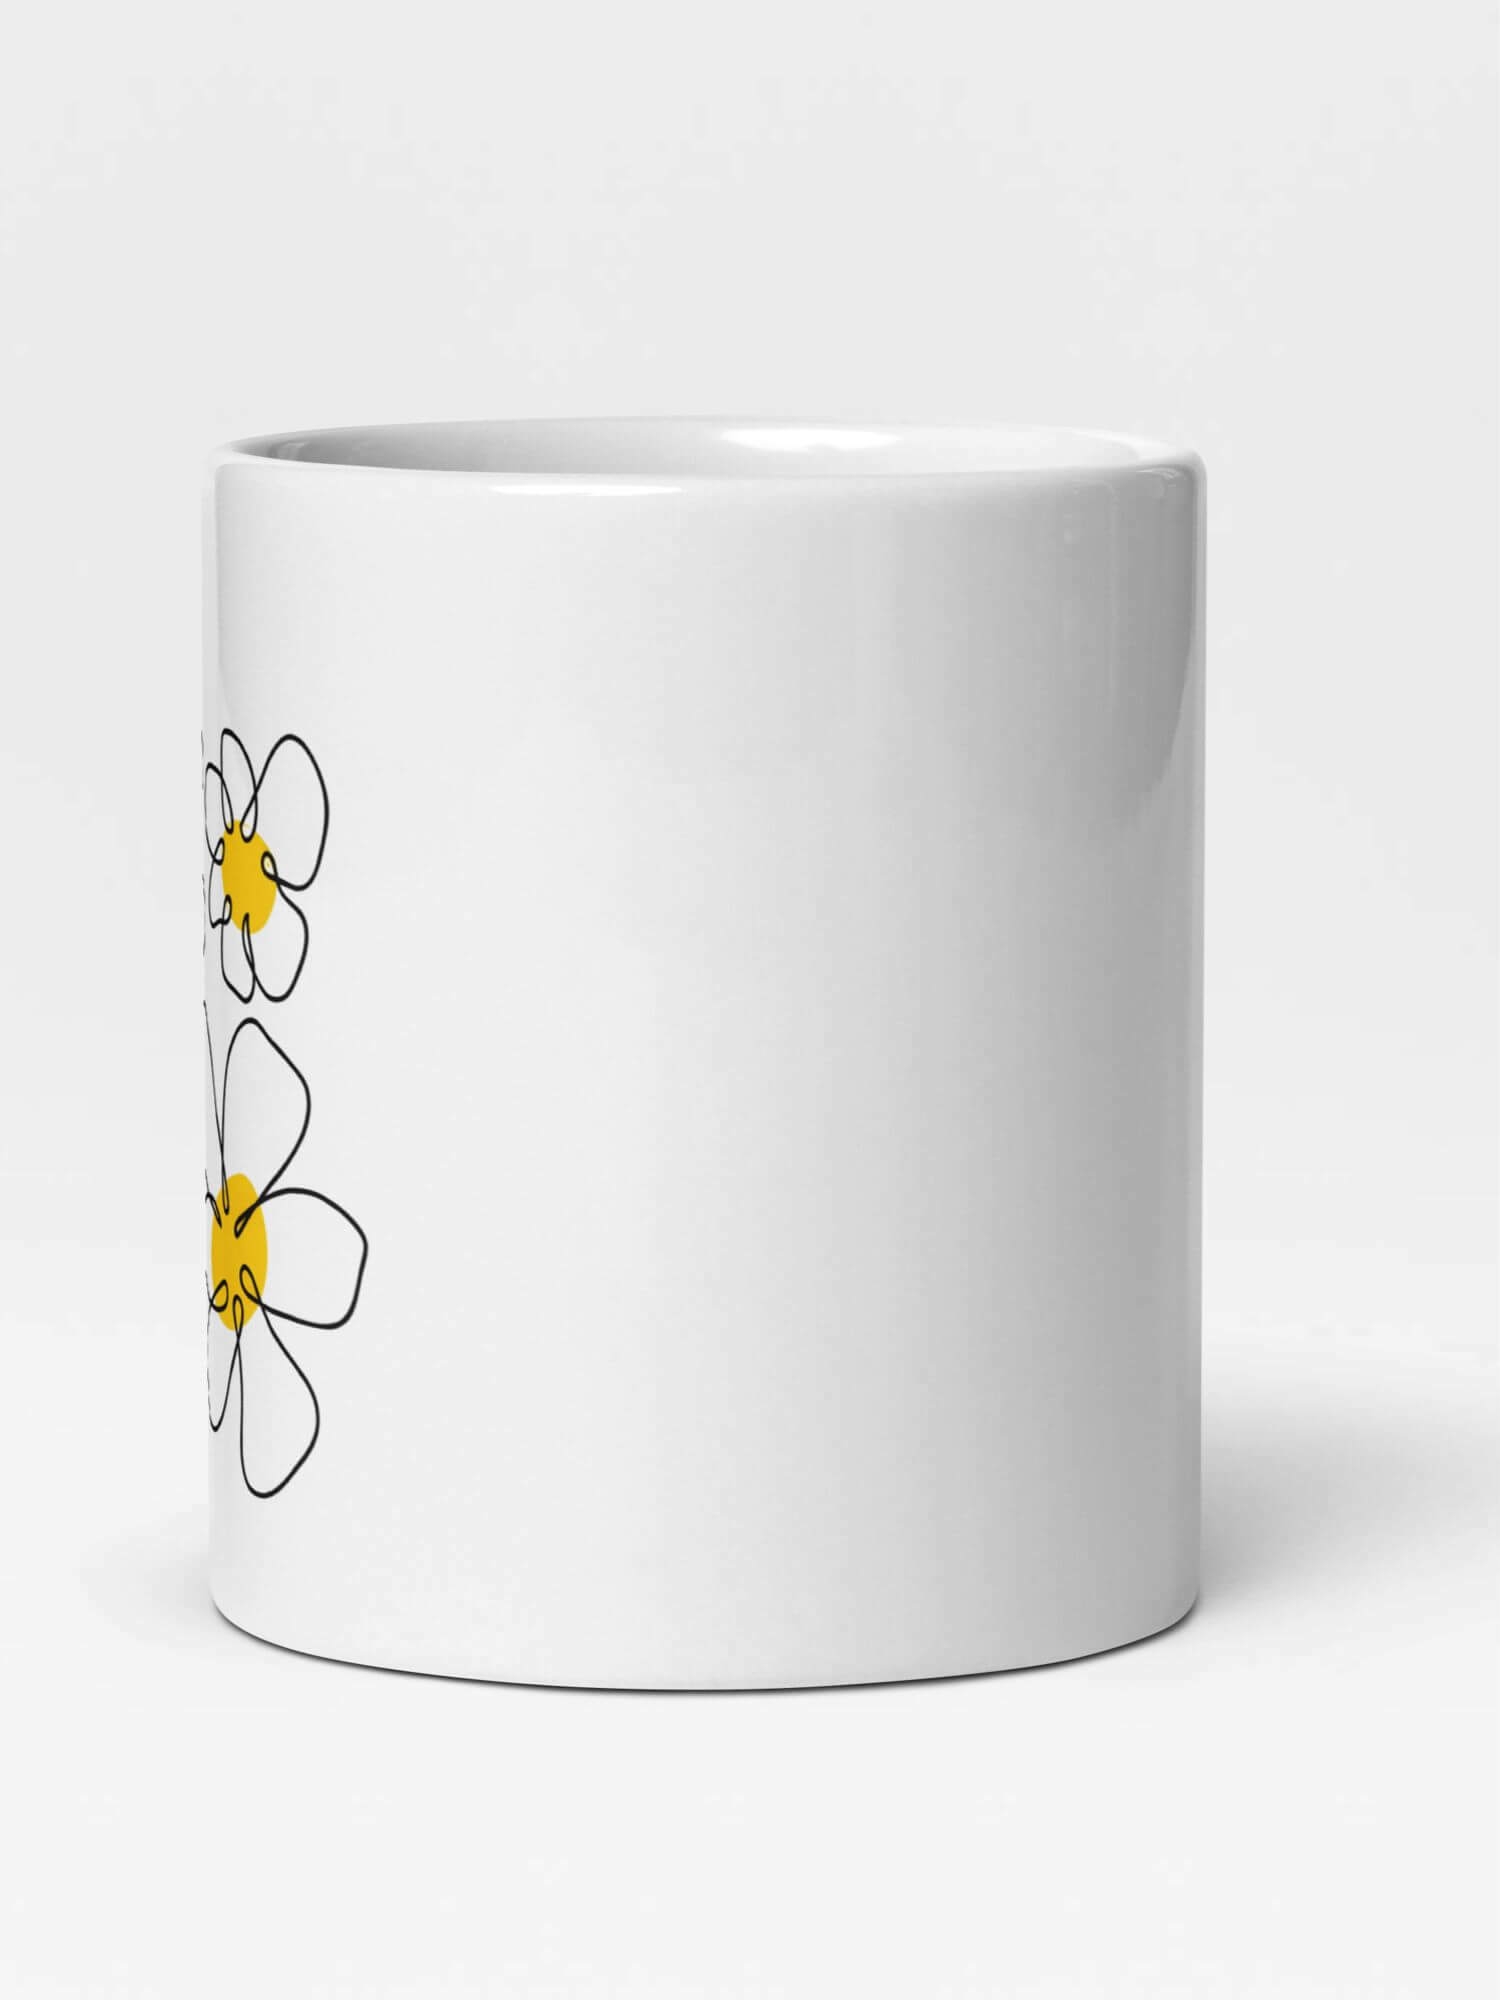 Glossy  Floral Daisy Mug              Cartoon flowers drinks cup coffee, tea, juice, milk drinking cups miteigi branded product item tumblers ceramics in white with yellow black pattern Ceramic Anime daisies Gifts mugs